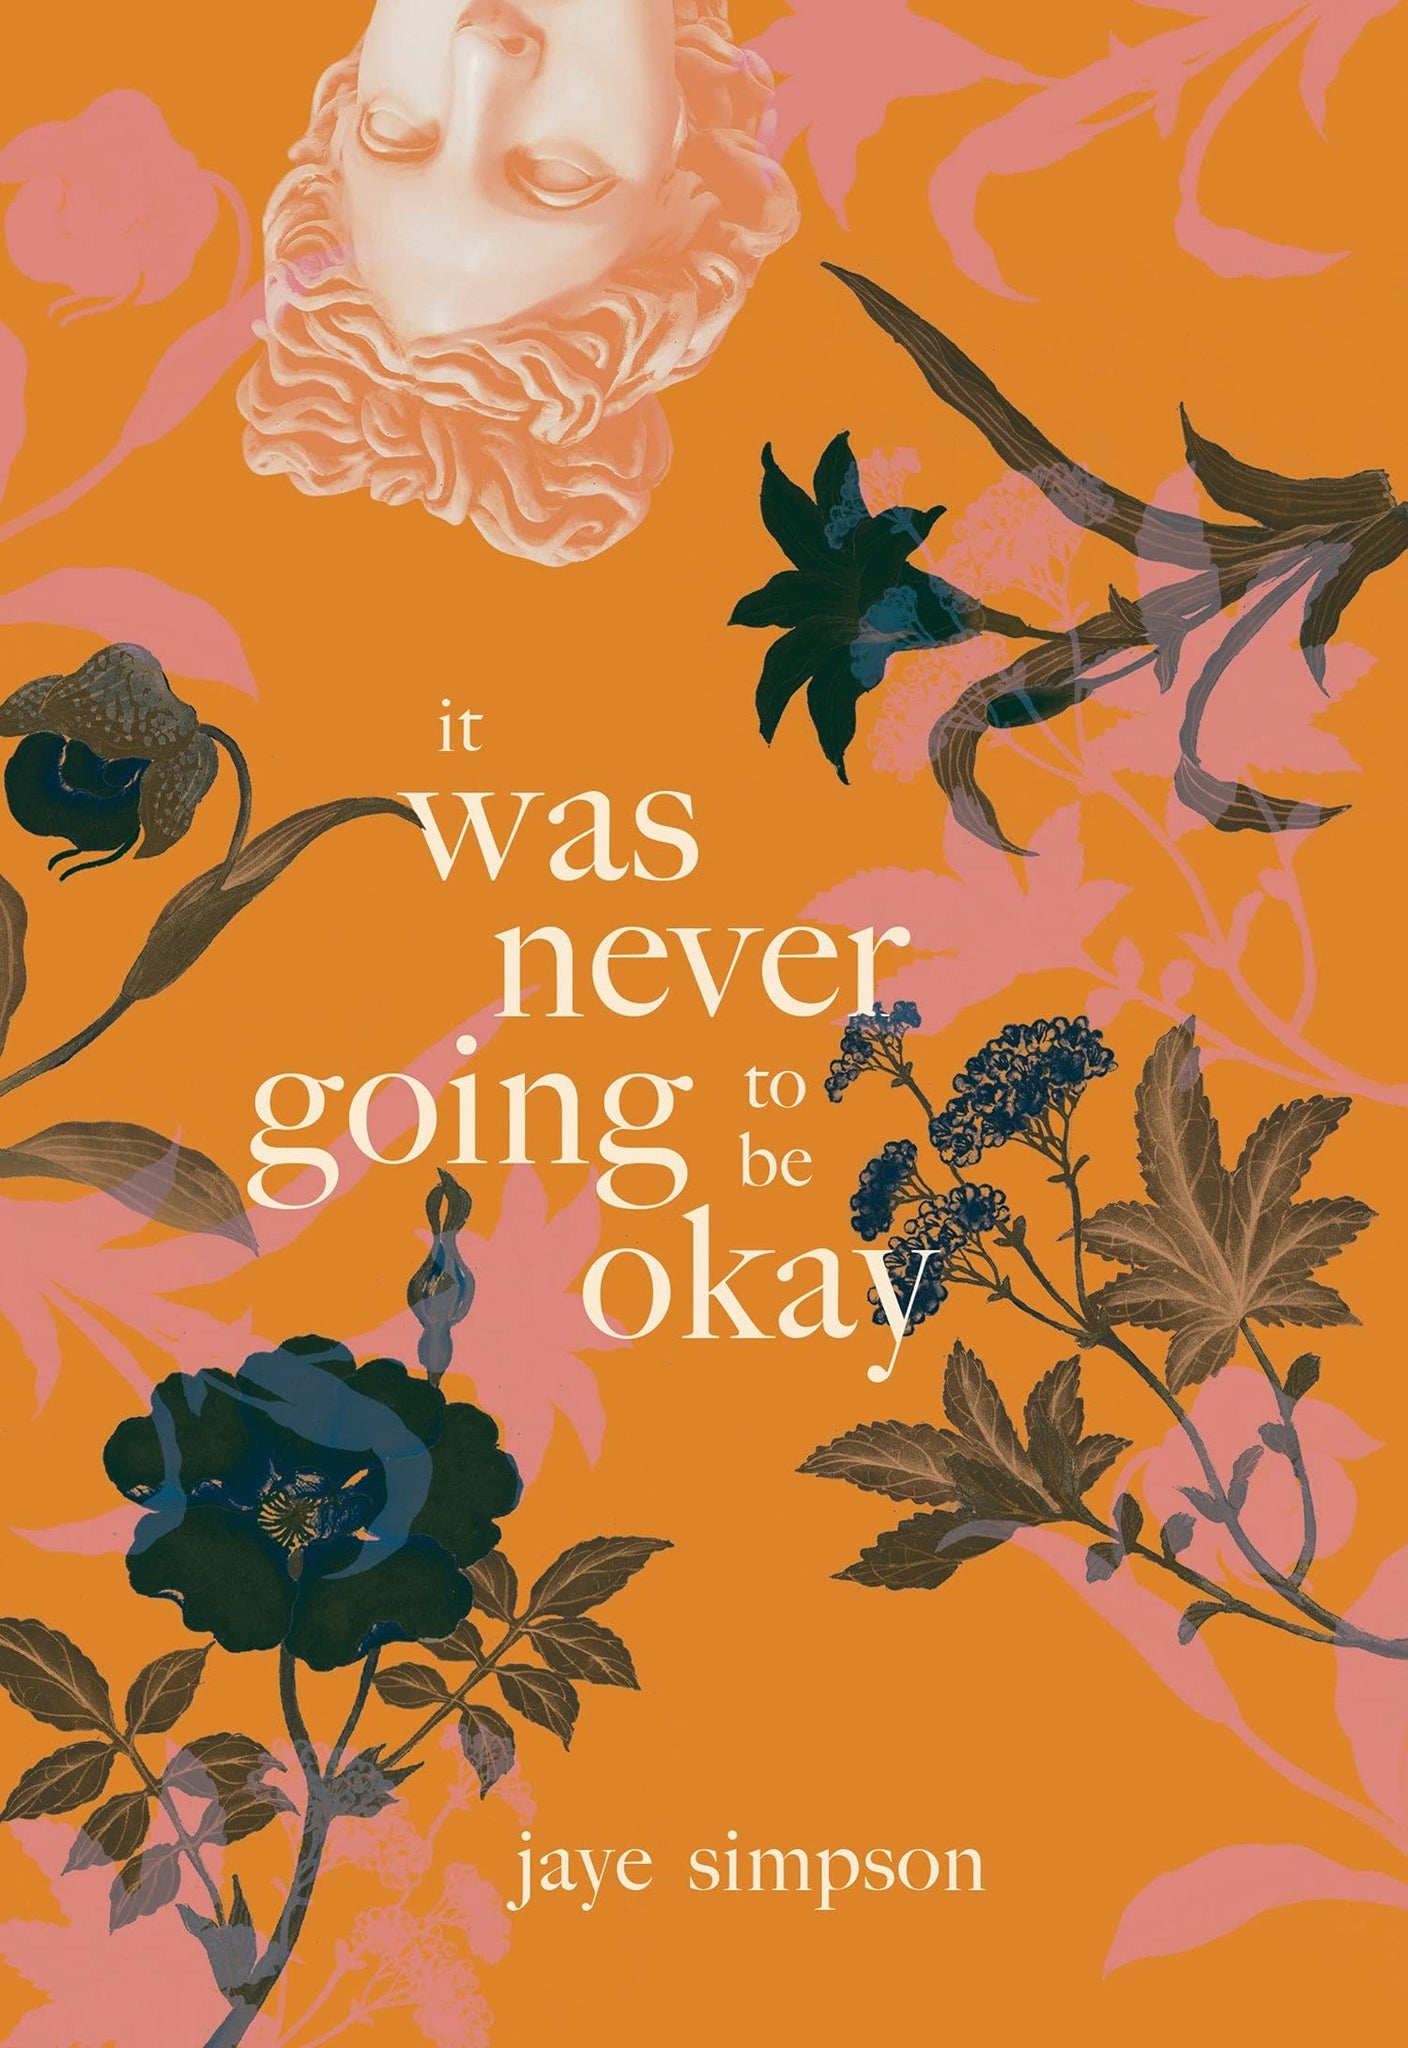 it was never going to be okay